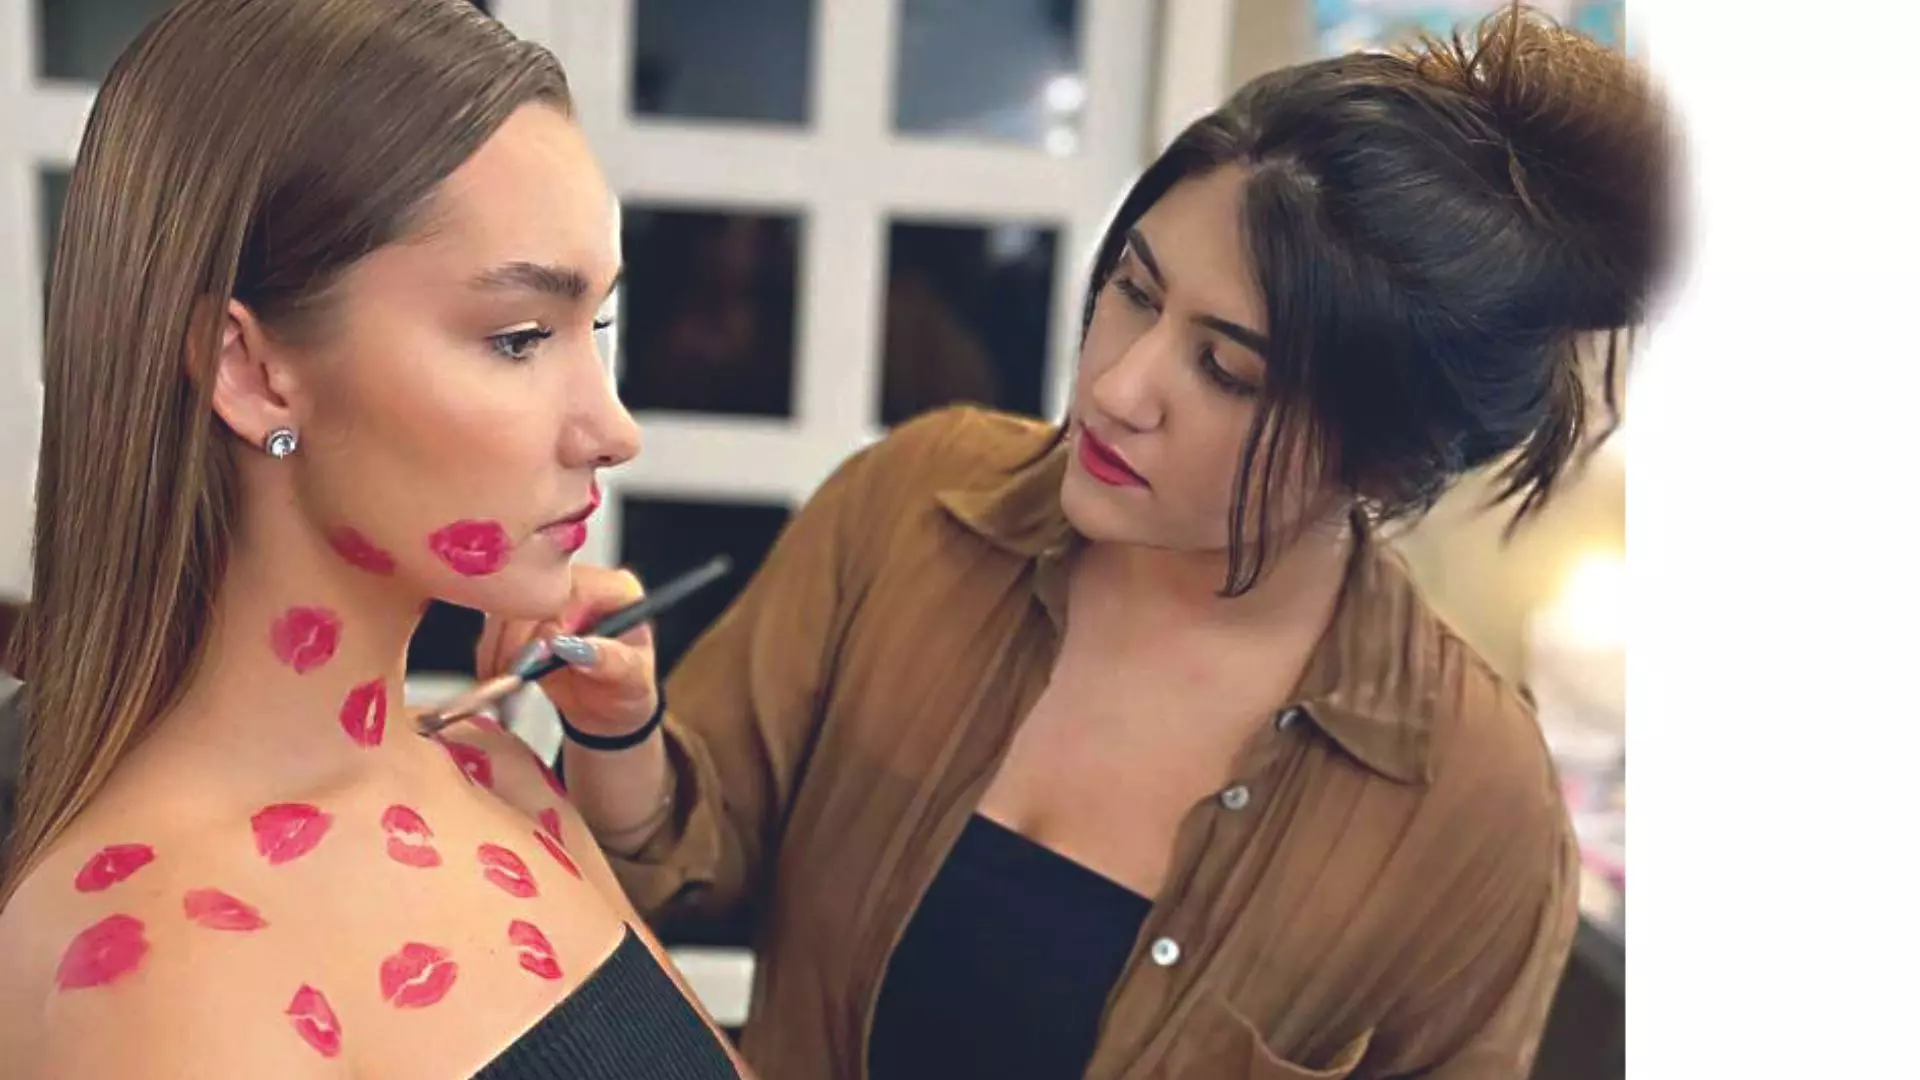 Confessions of Makeup Artists